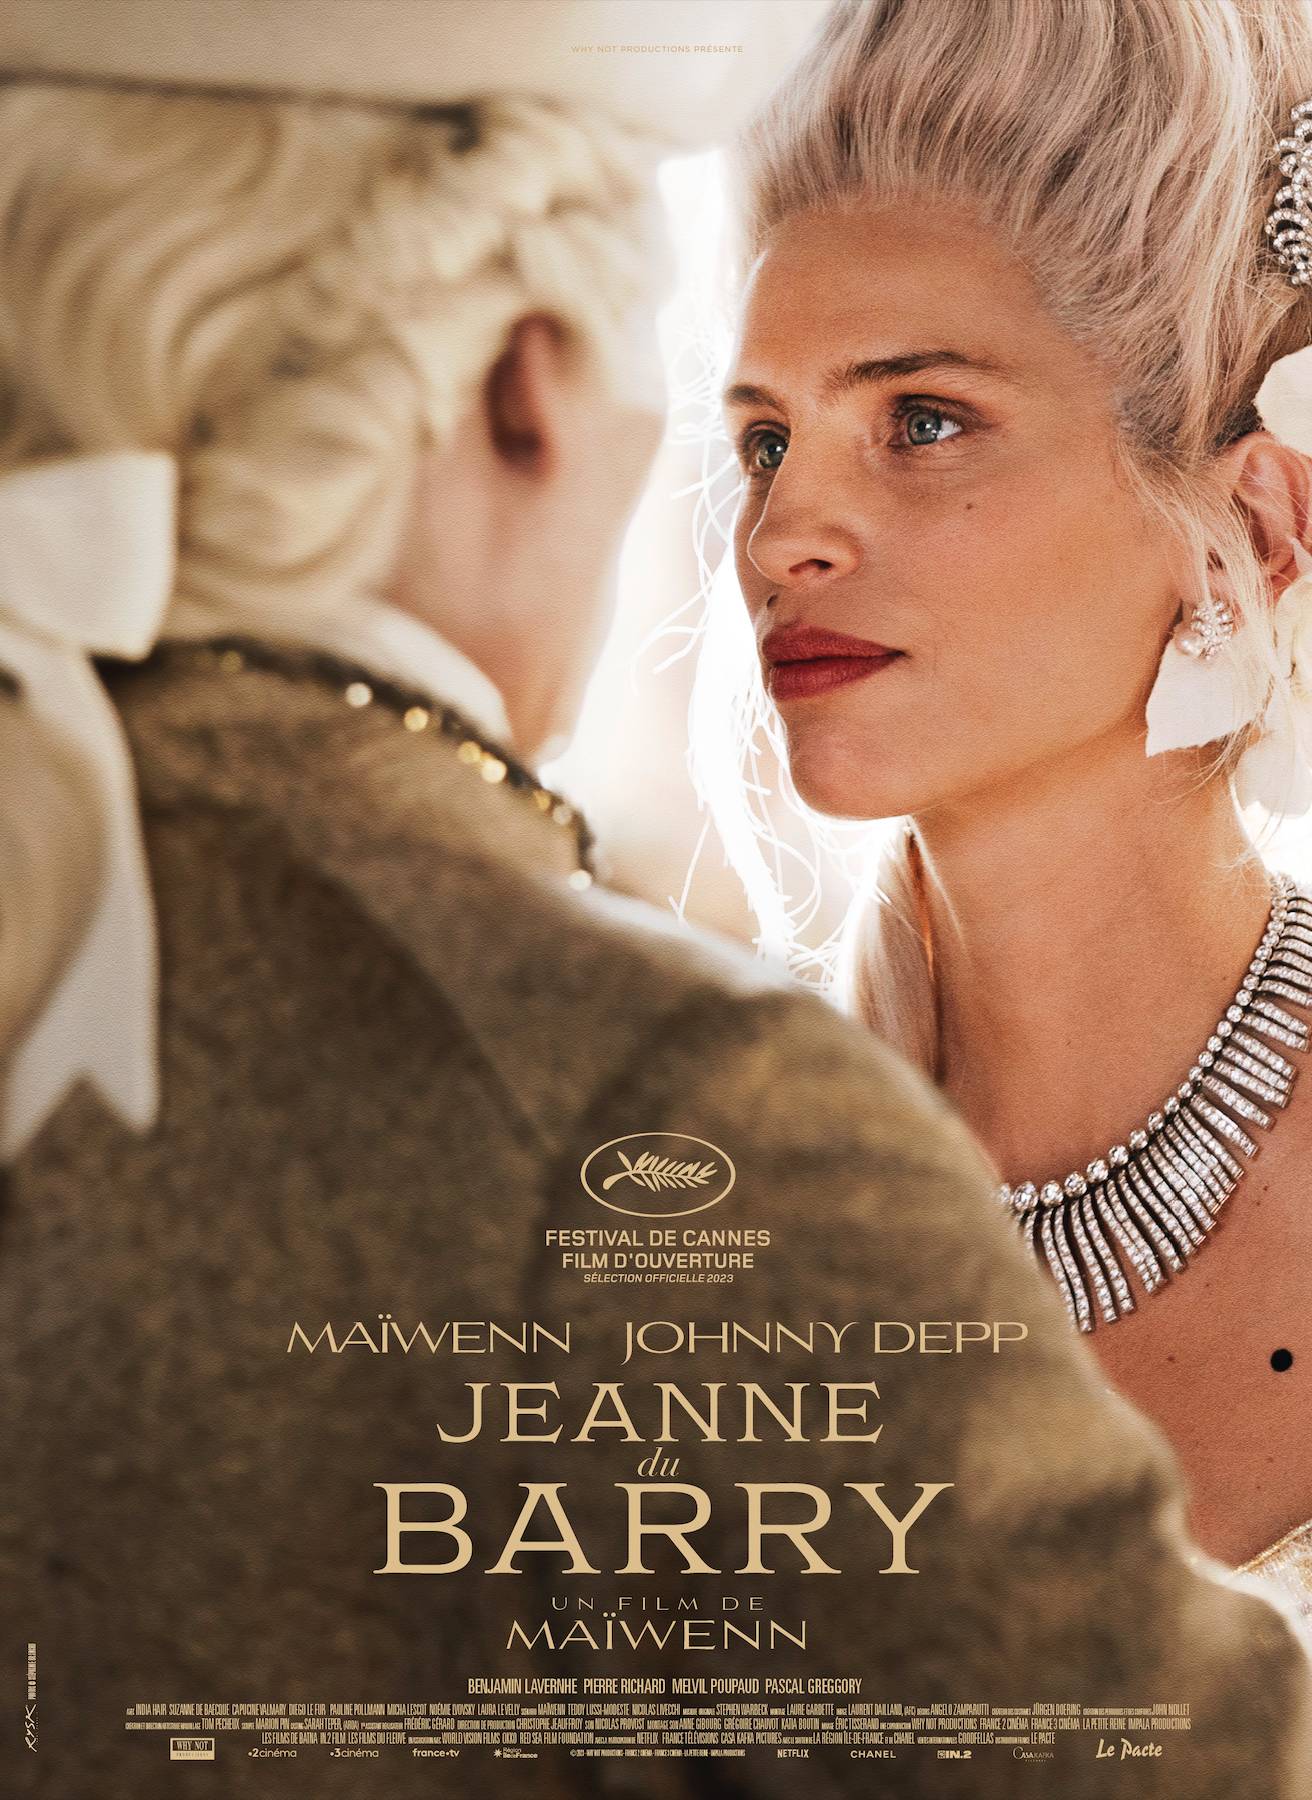 CHANEL, EXCLUSIVE PARTNER OF THE FILM JEANNE DU BARRY BY MAÏWENN